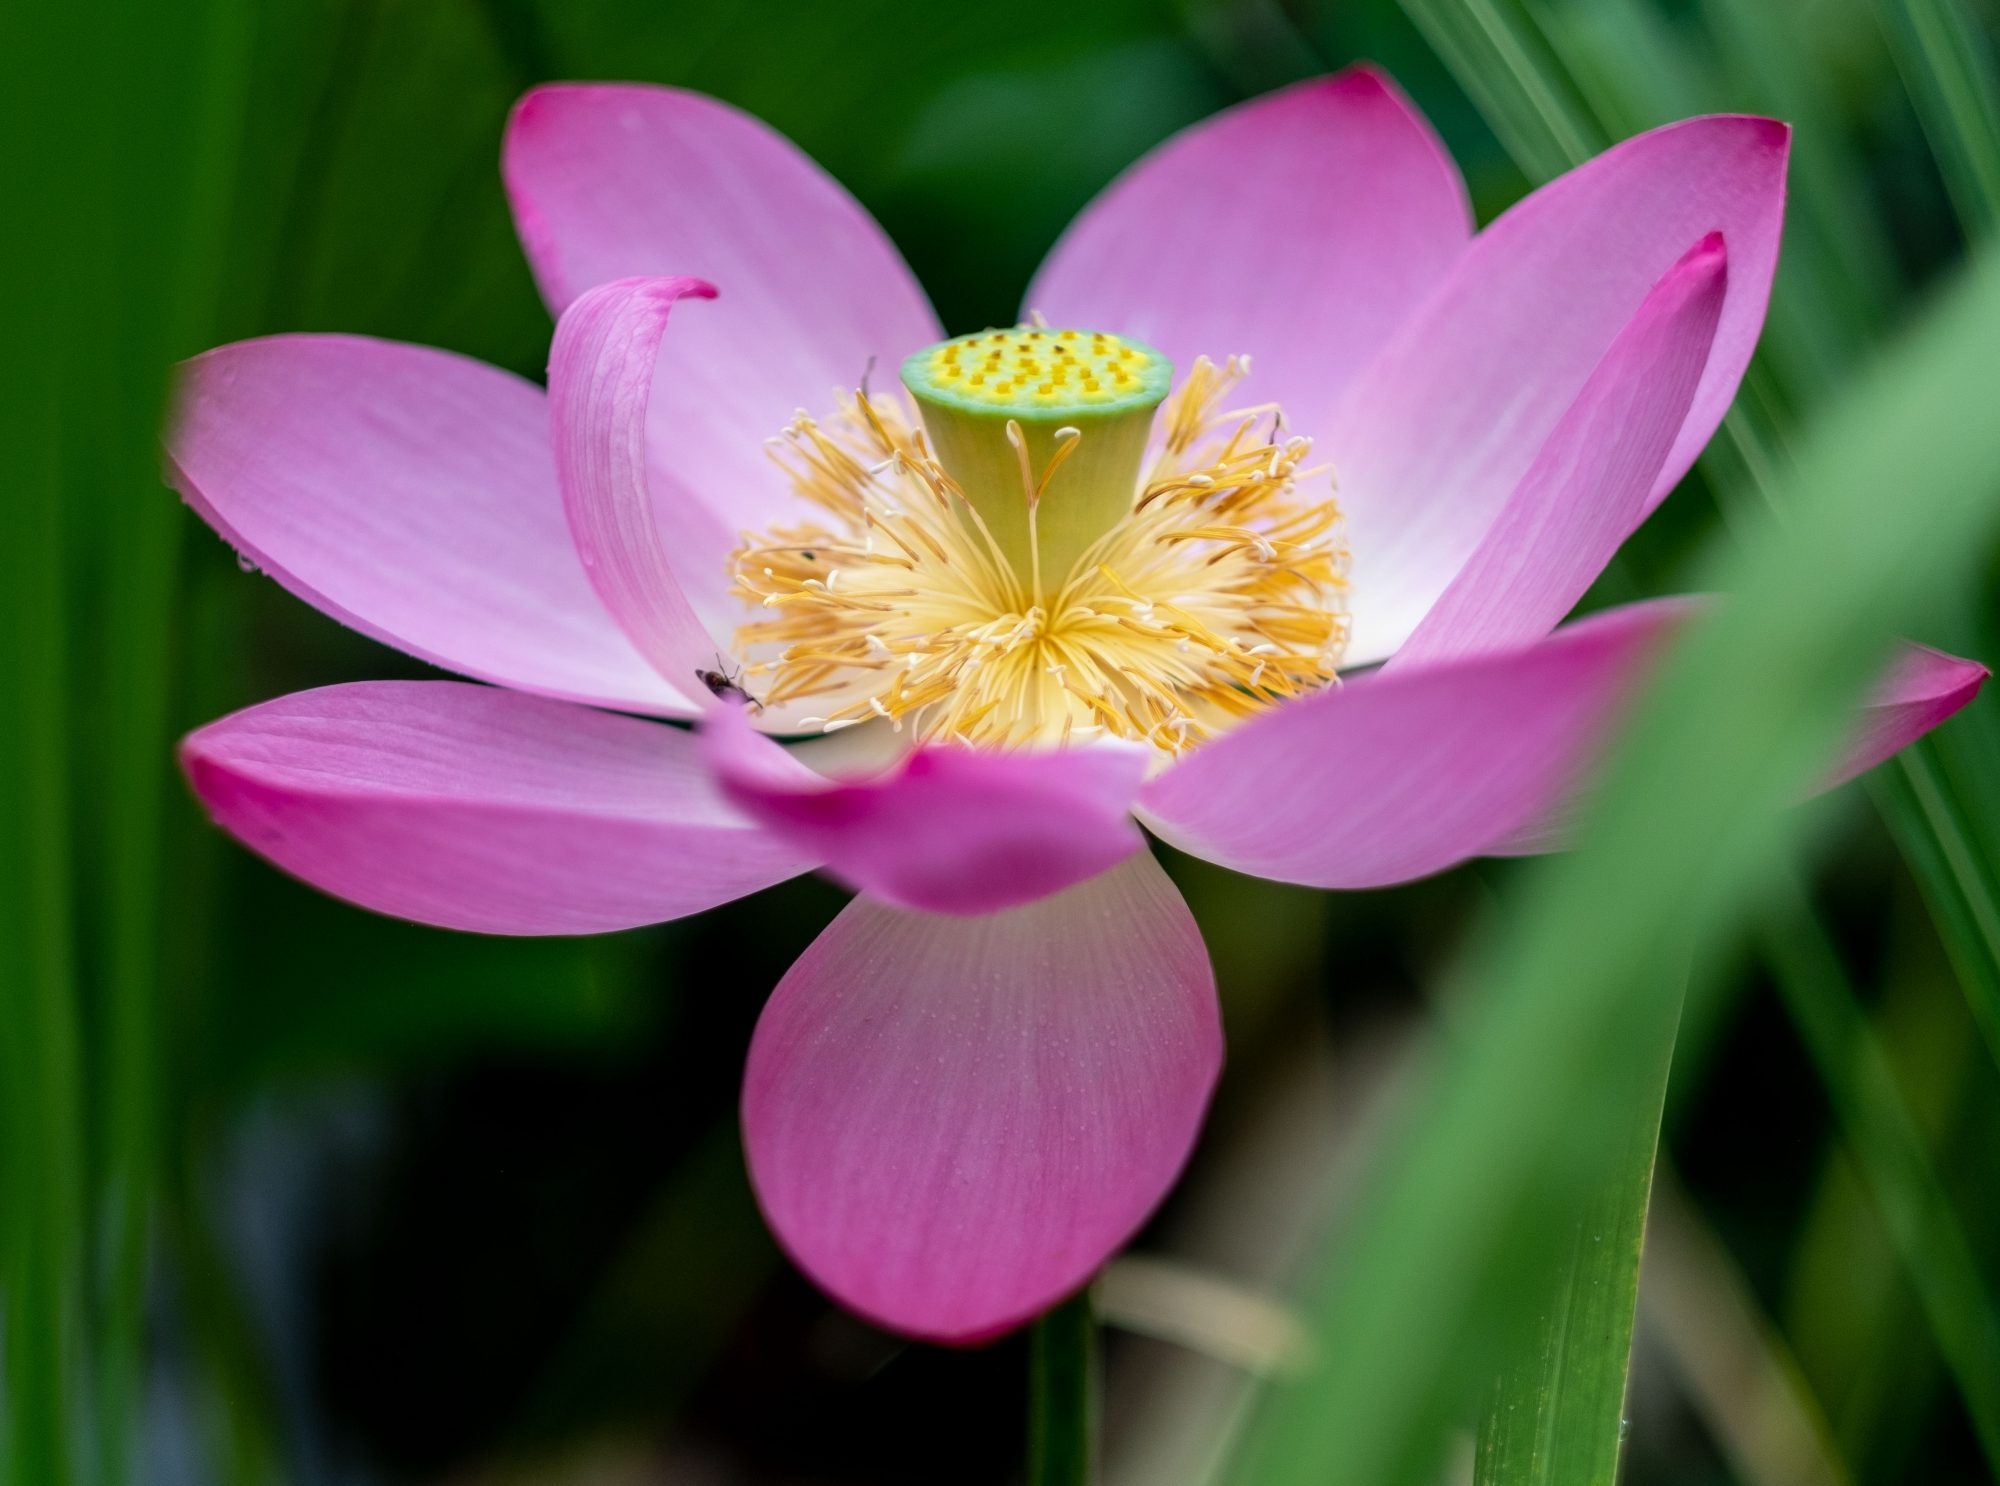 Lotus flower blooming, Exquisite blossoms, Nature's miracle, Captivating transformation, 2000x1490 HD Desktop